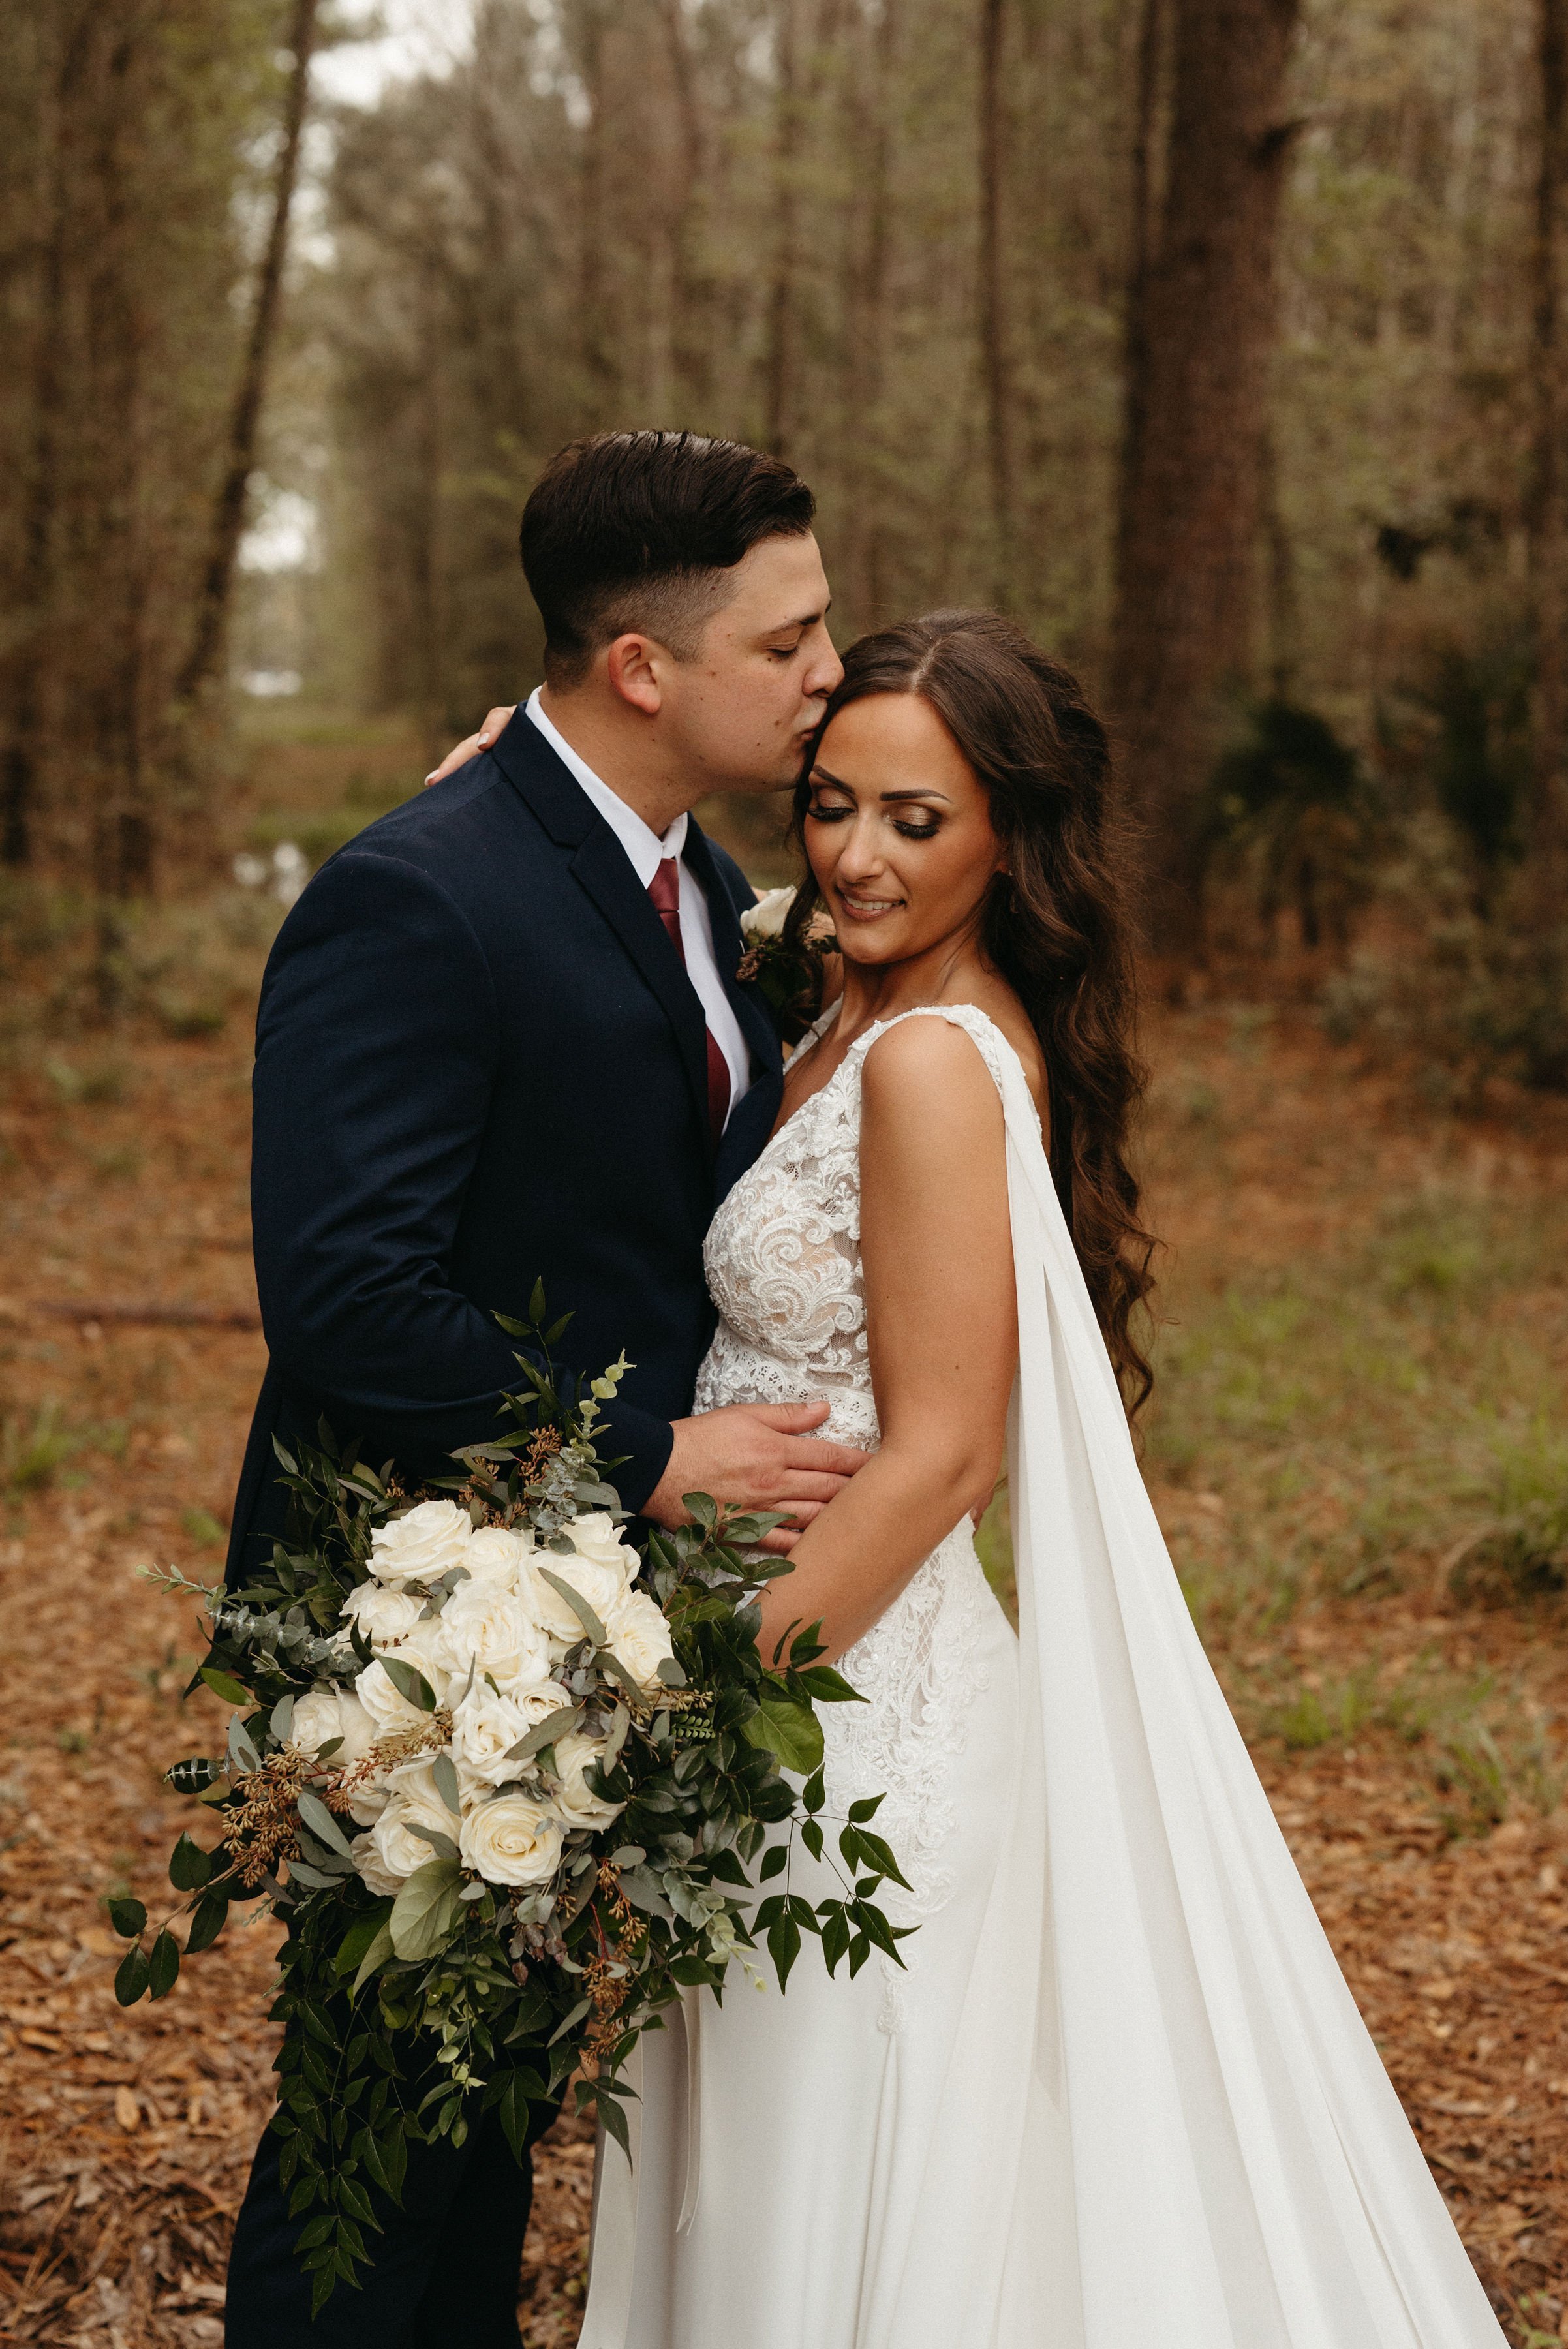 ivory-and-beau-blog-down-for-the-gown-lorren-real-bride-southern-bride-maggie-sottero-wedding-dress-made-with-love-bridal-wings-savannah-bridal-shop-savannah-bridal-boutique-savannah-georgia-The_Buie_Barn_Hall_Wedding_March_2022-45.jpg